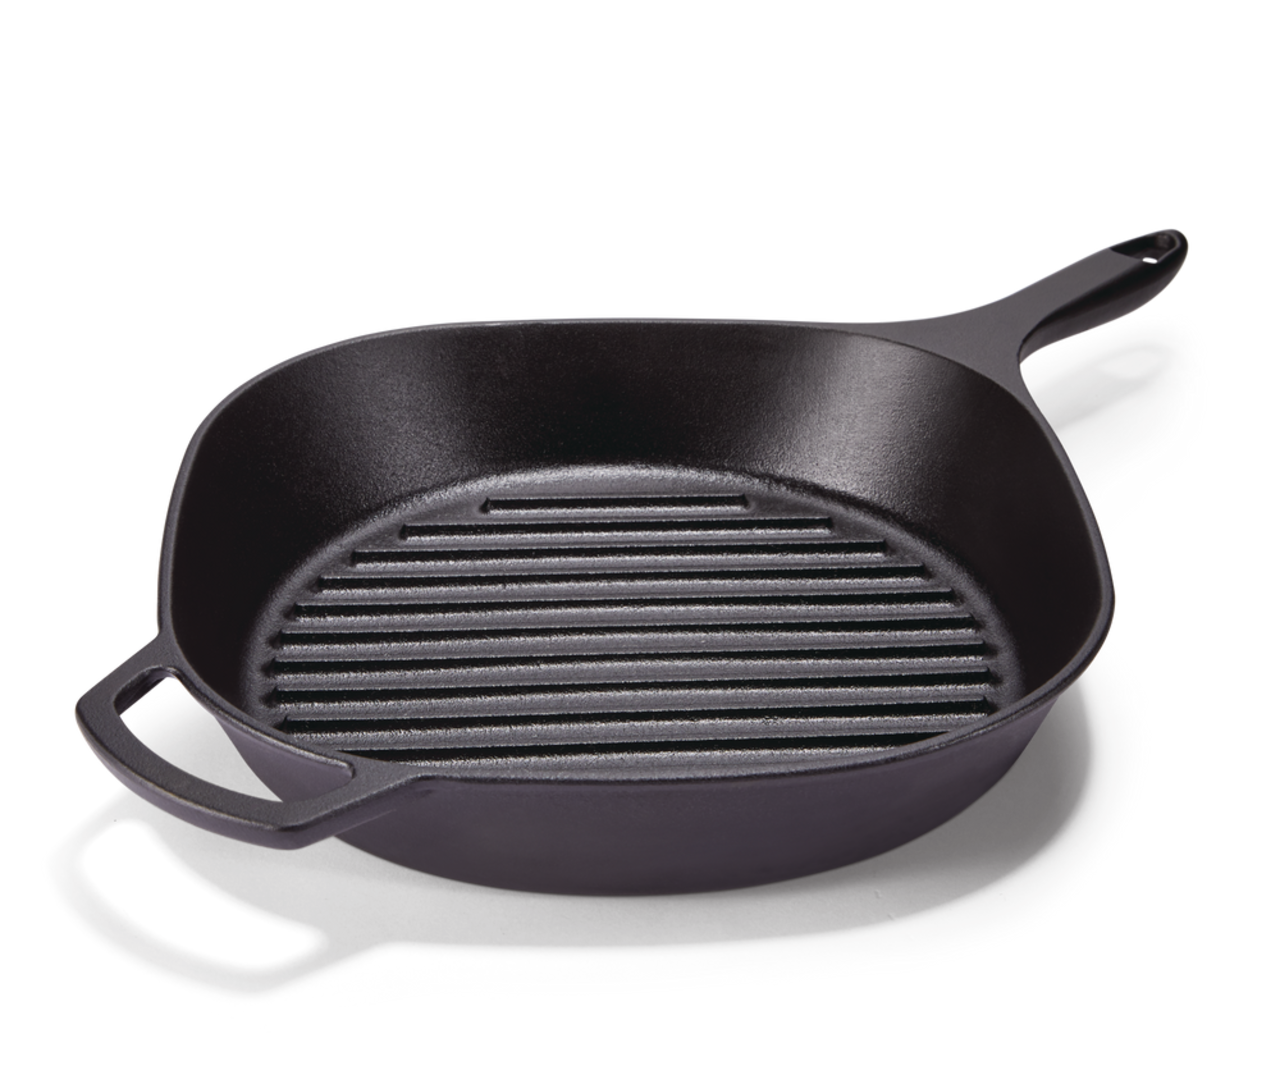 https://media-www.canadiantire.ca/product/living/kitchen/cookware/1429870/paderno-signature-12-pre-seasoned-cast-iron-grill-pan-b175400f-e835-467d-9cdb-35c81781a9a0.png?imdensity=1&imwidth=640&impolicy=mZoom